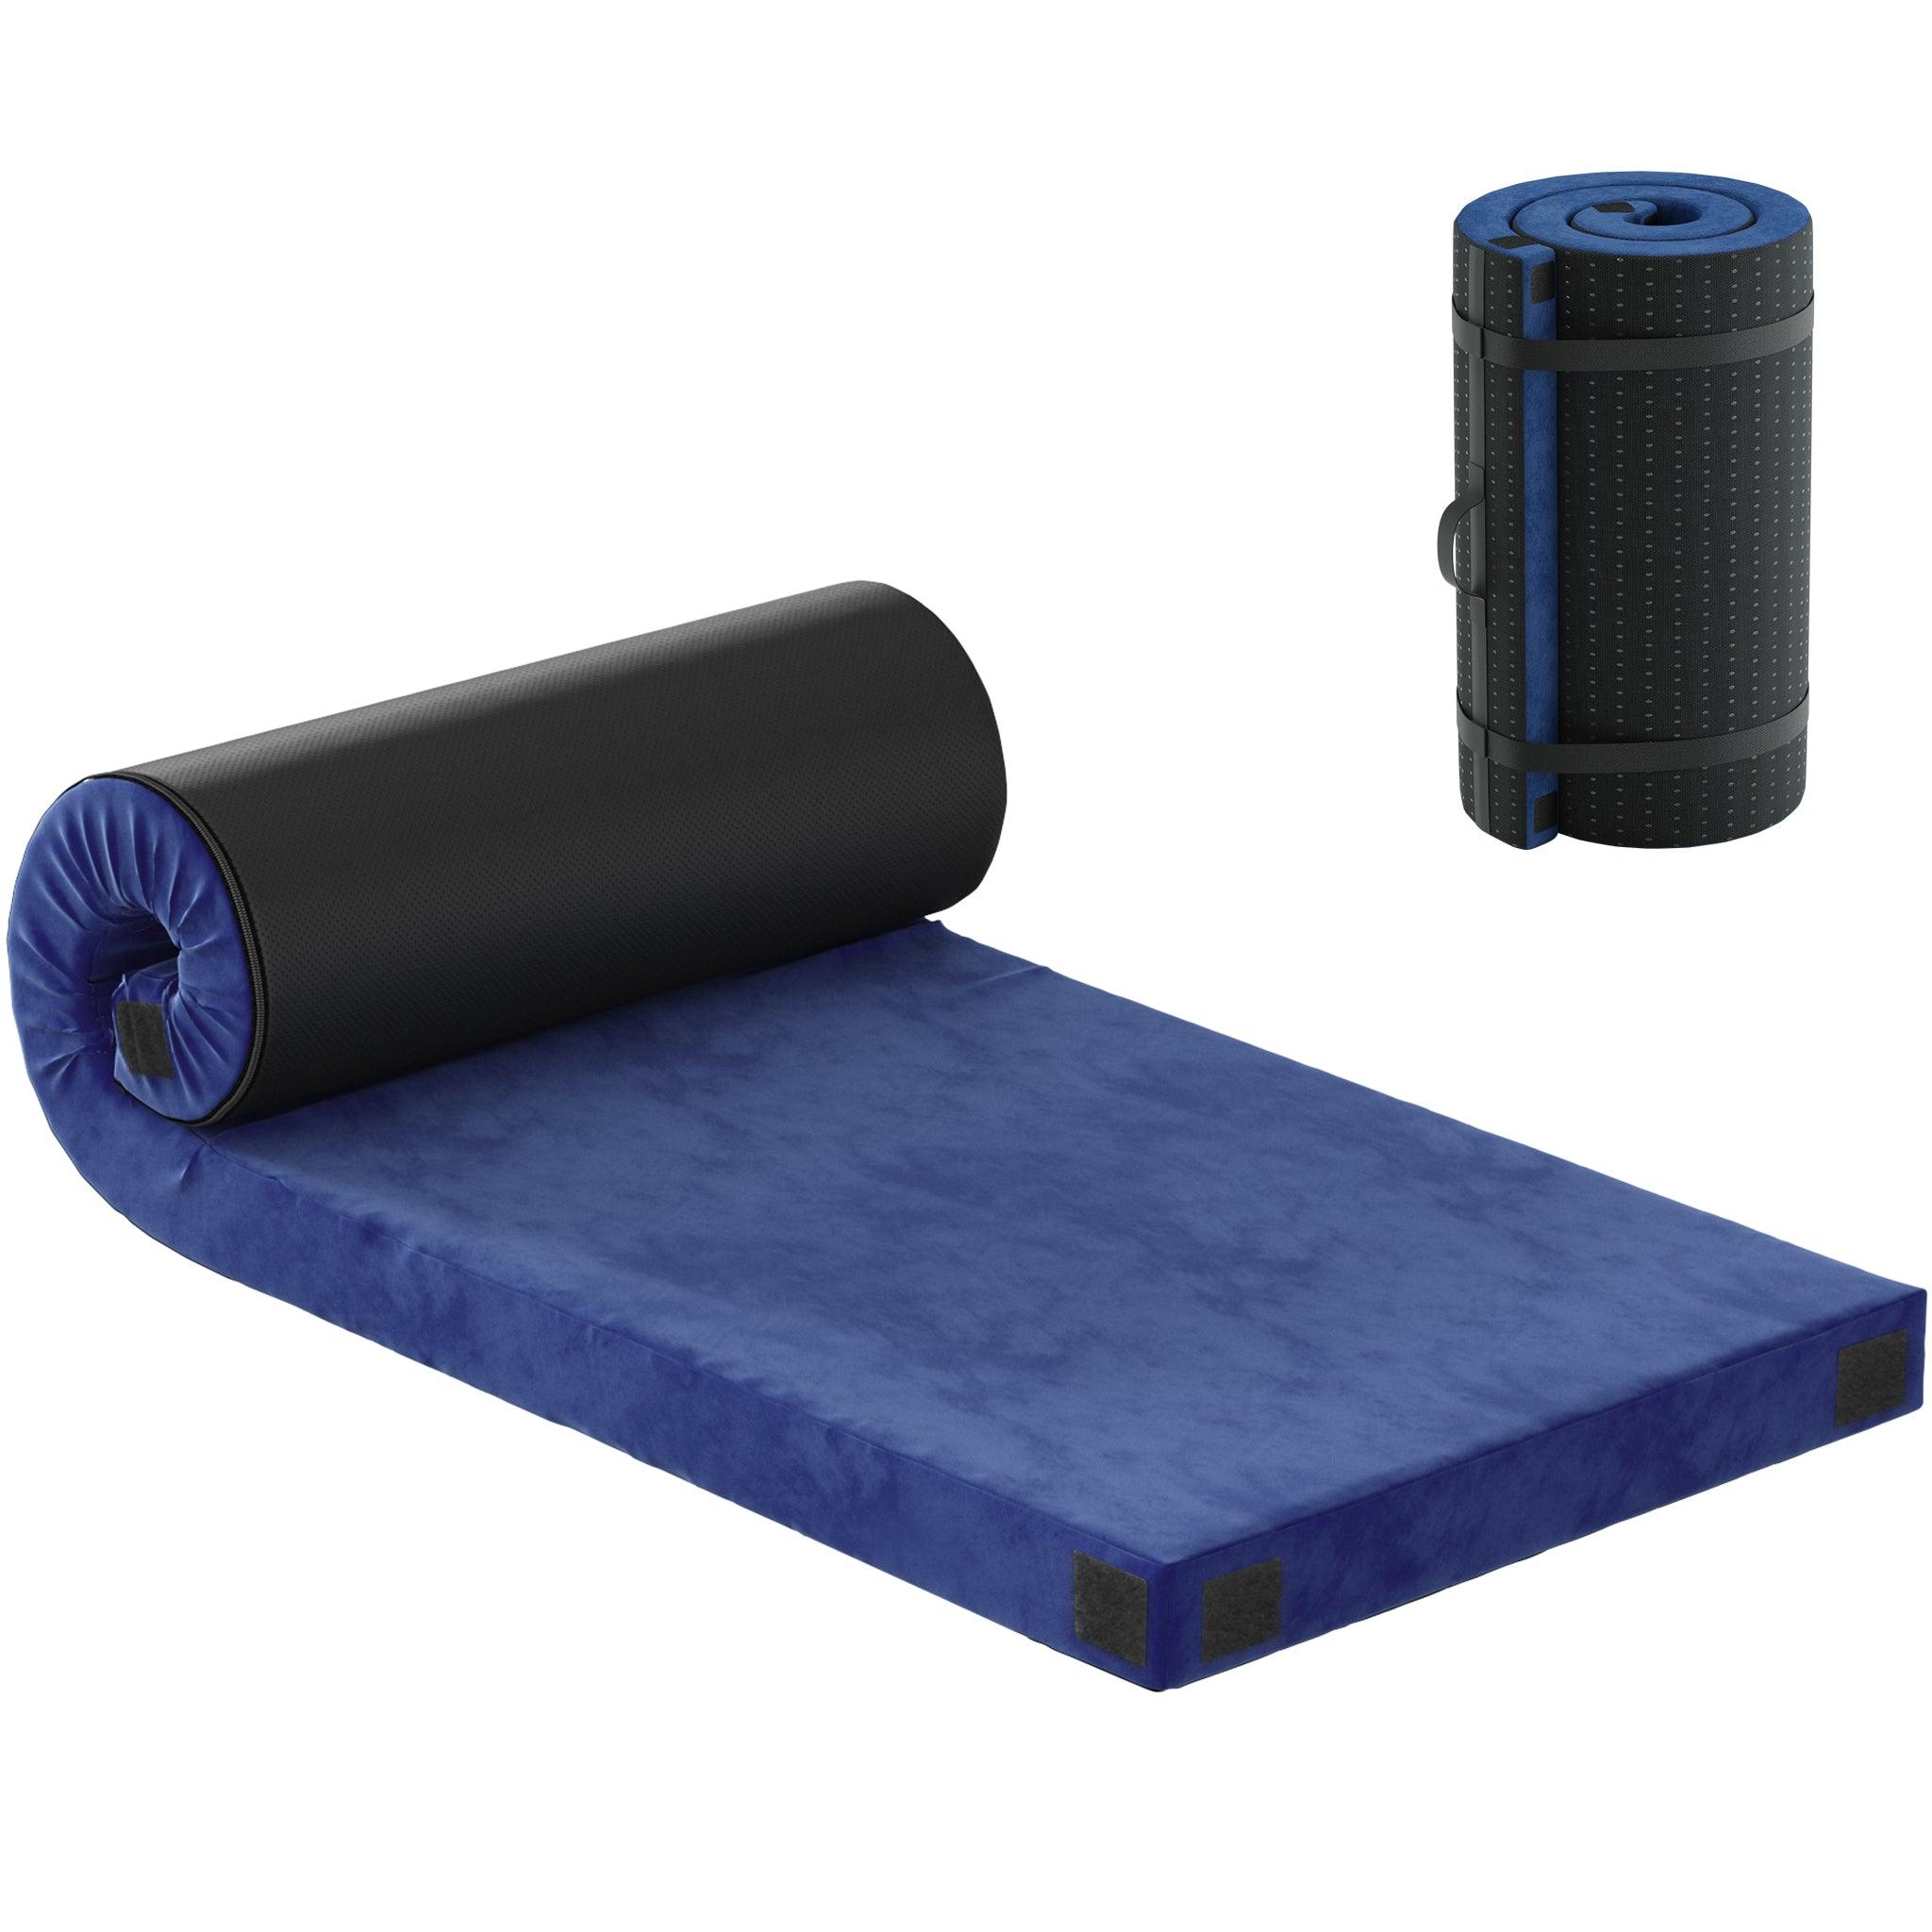 RaDEWAY Memory Portable Roll up Sleeping Mat with Storage Bag for Tent Travel